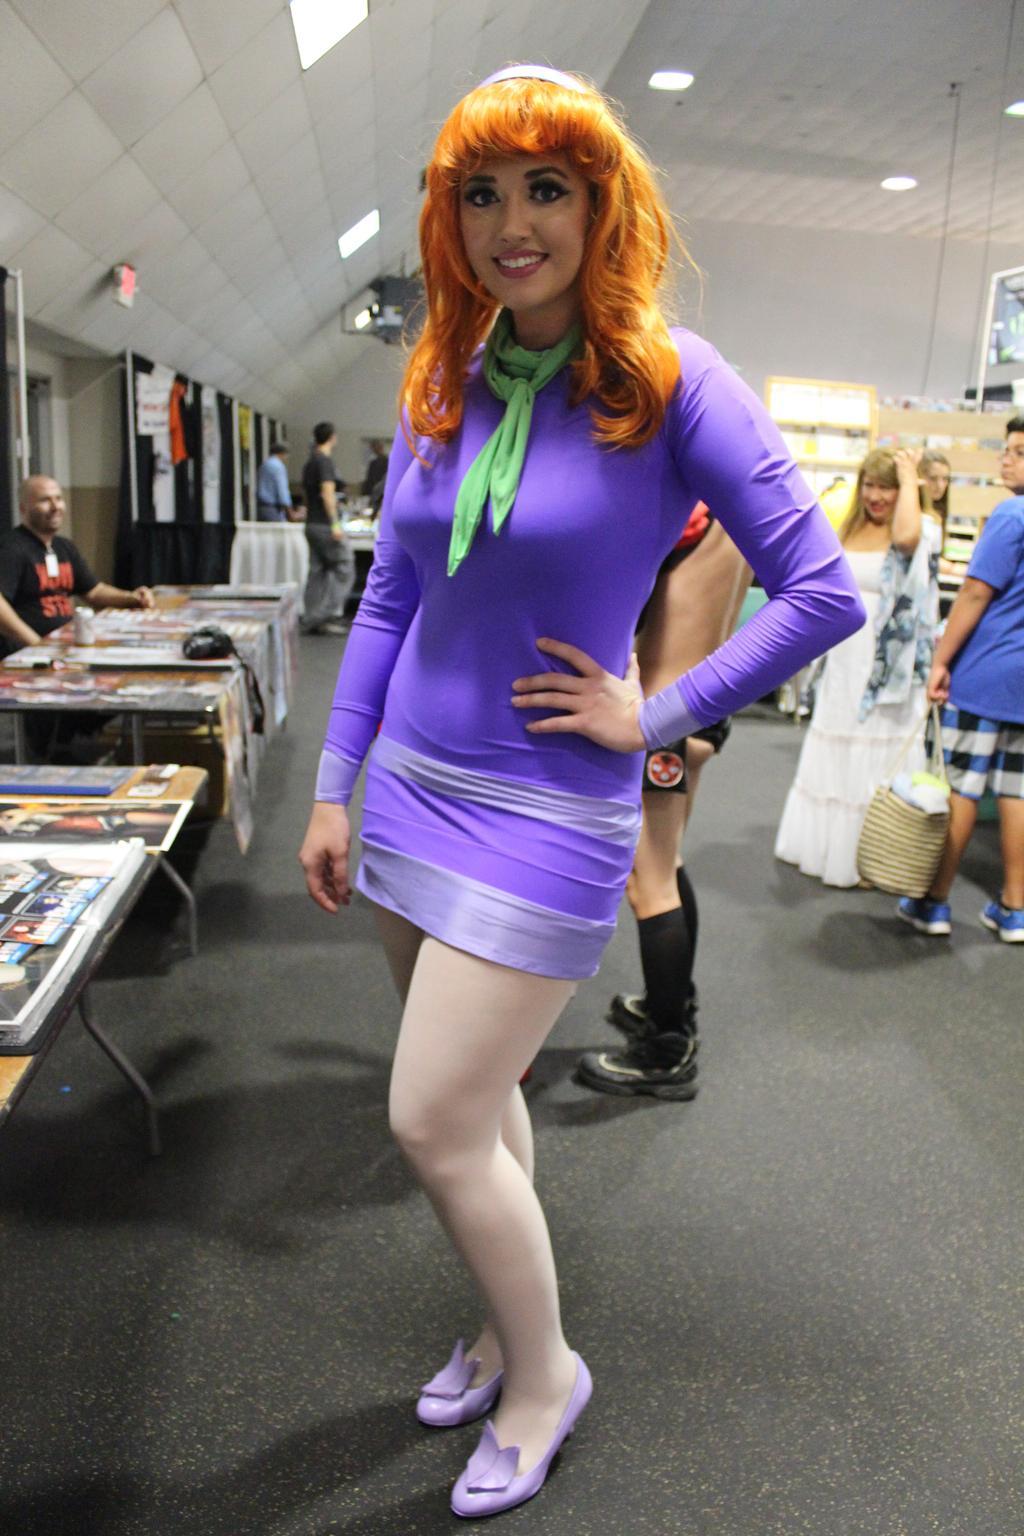 70+ Hot Pictures Of Daphne Blake From Scooby Doo Which Are Sure to Catch Your Attention 81